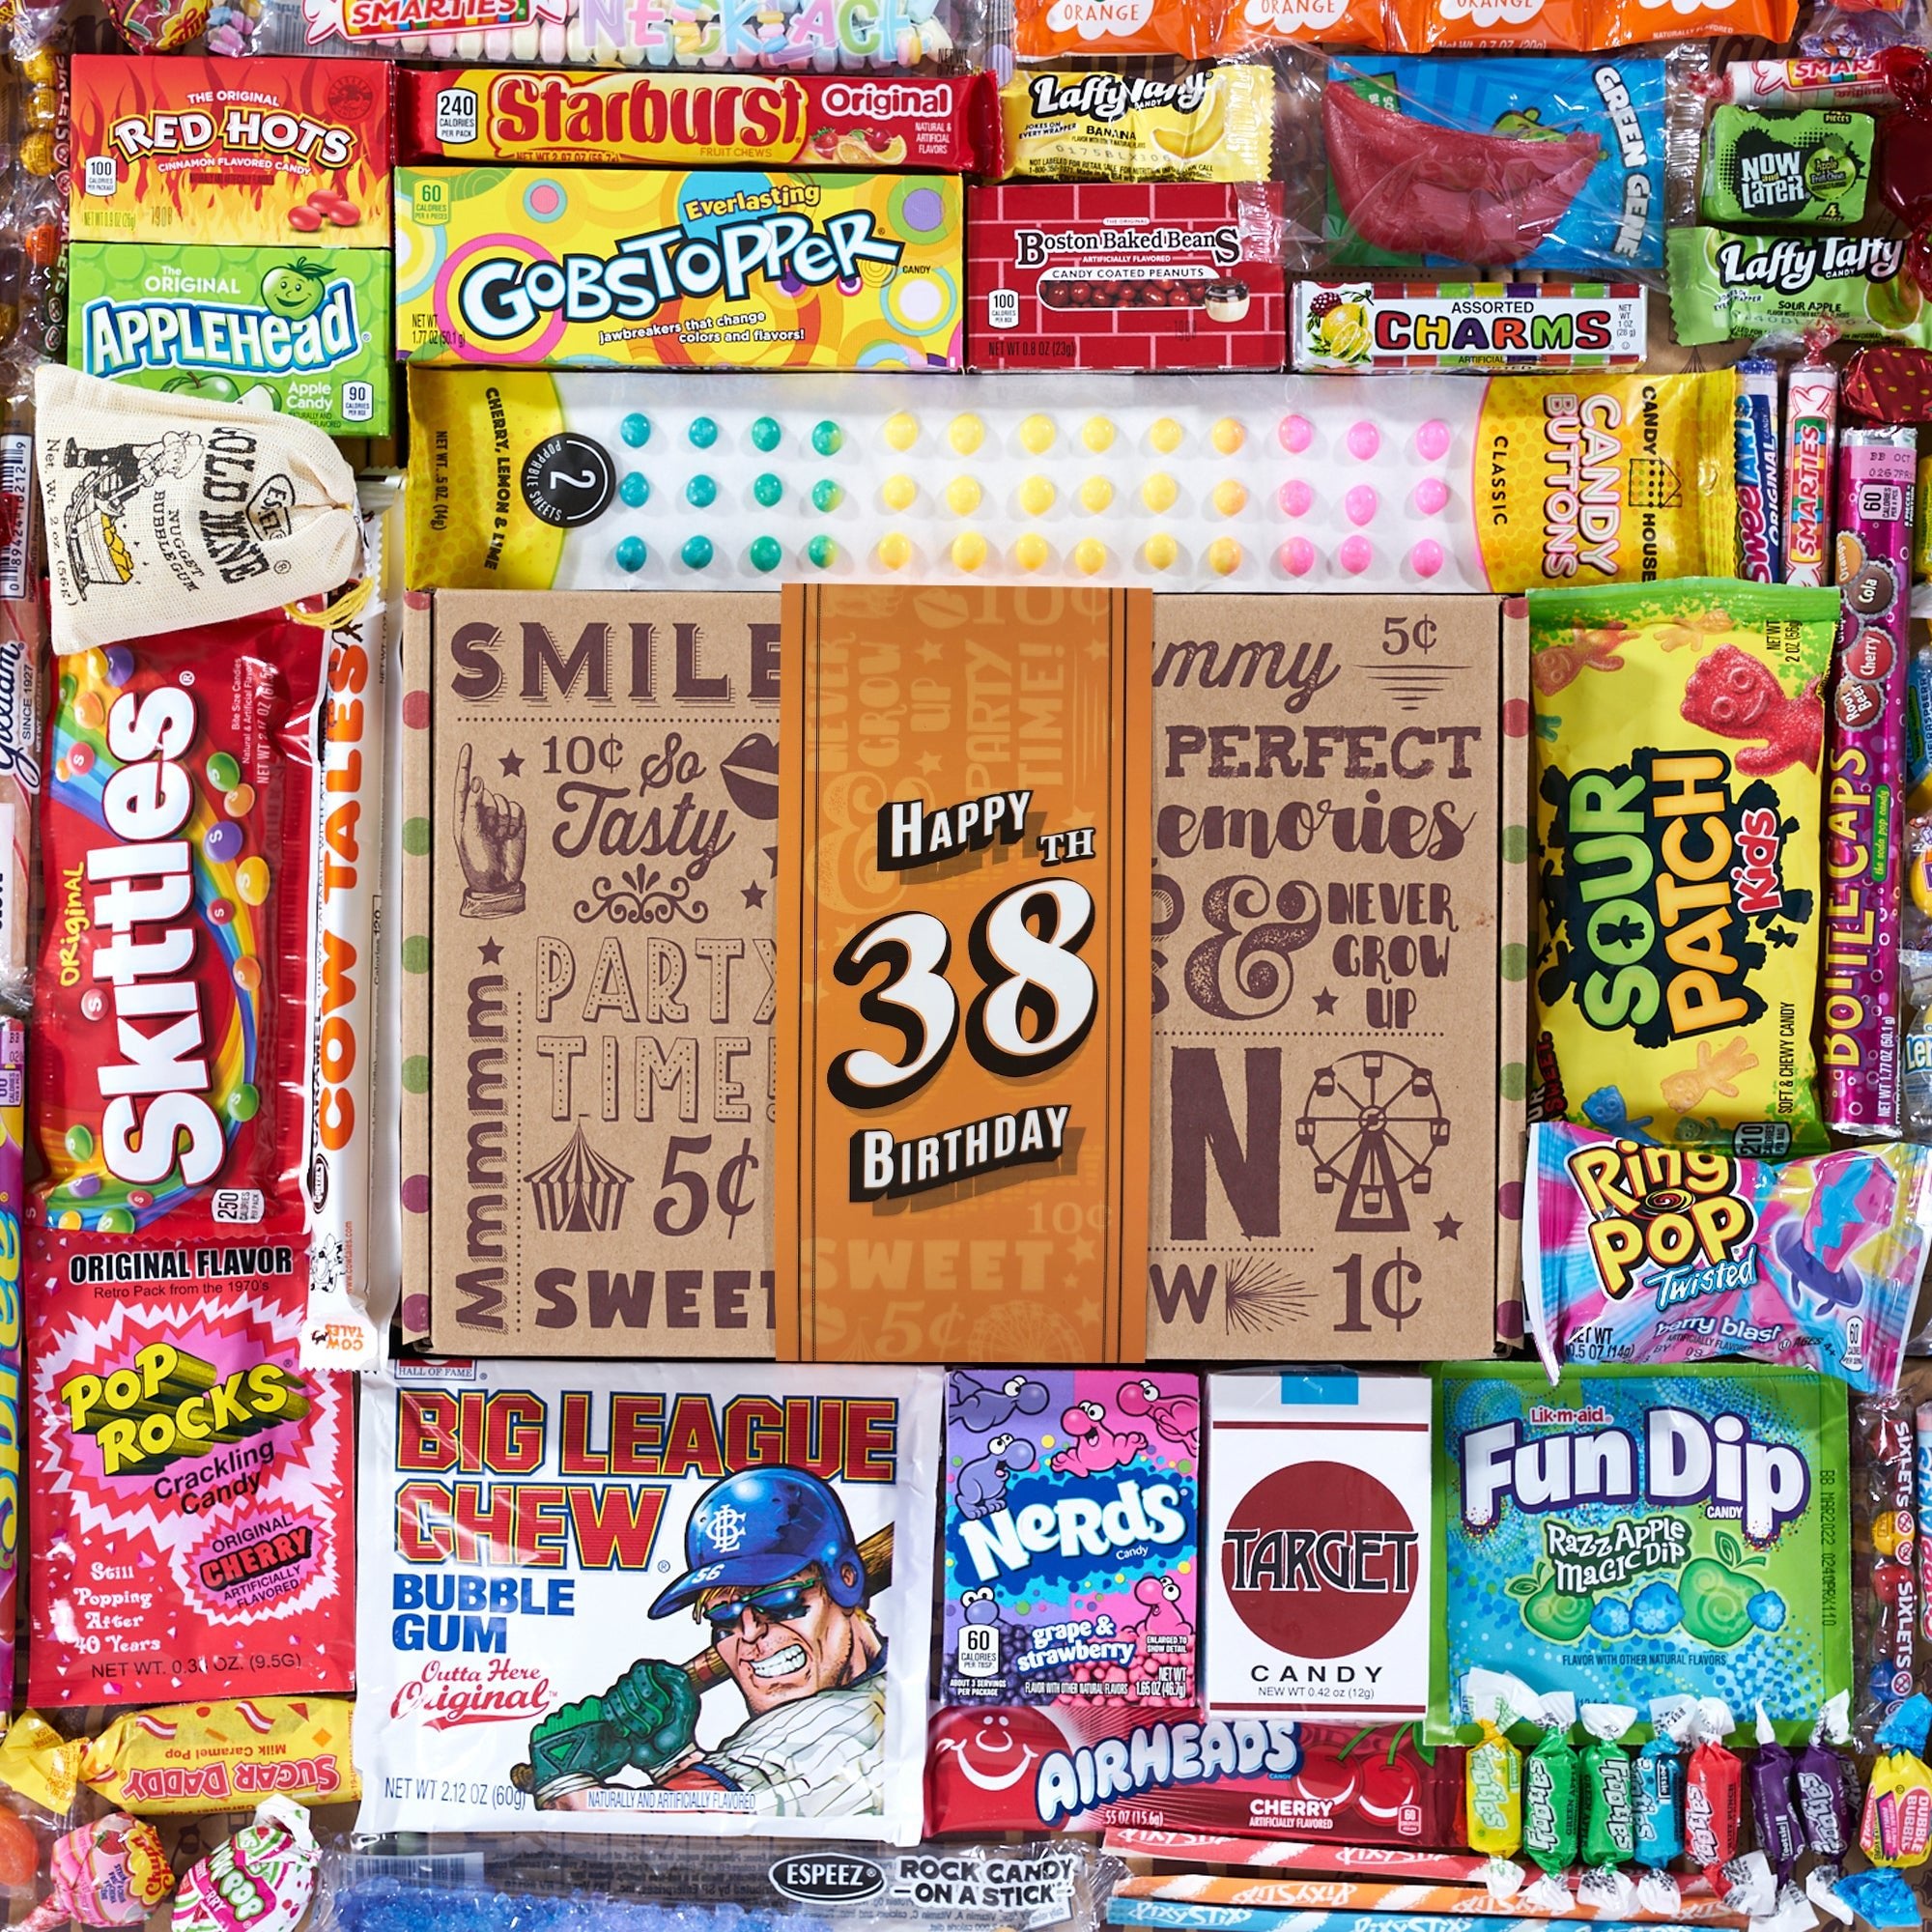 38th Birthday Retro Candy Gift - Vintage Candy Co.